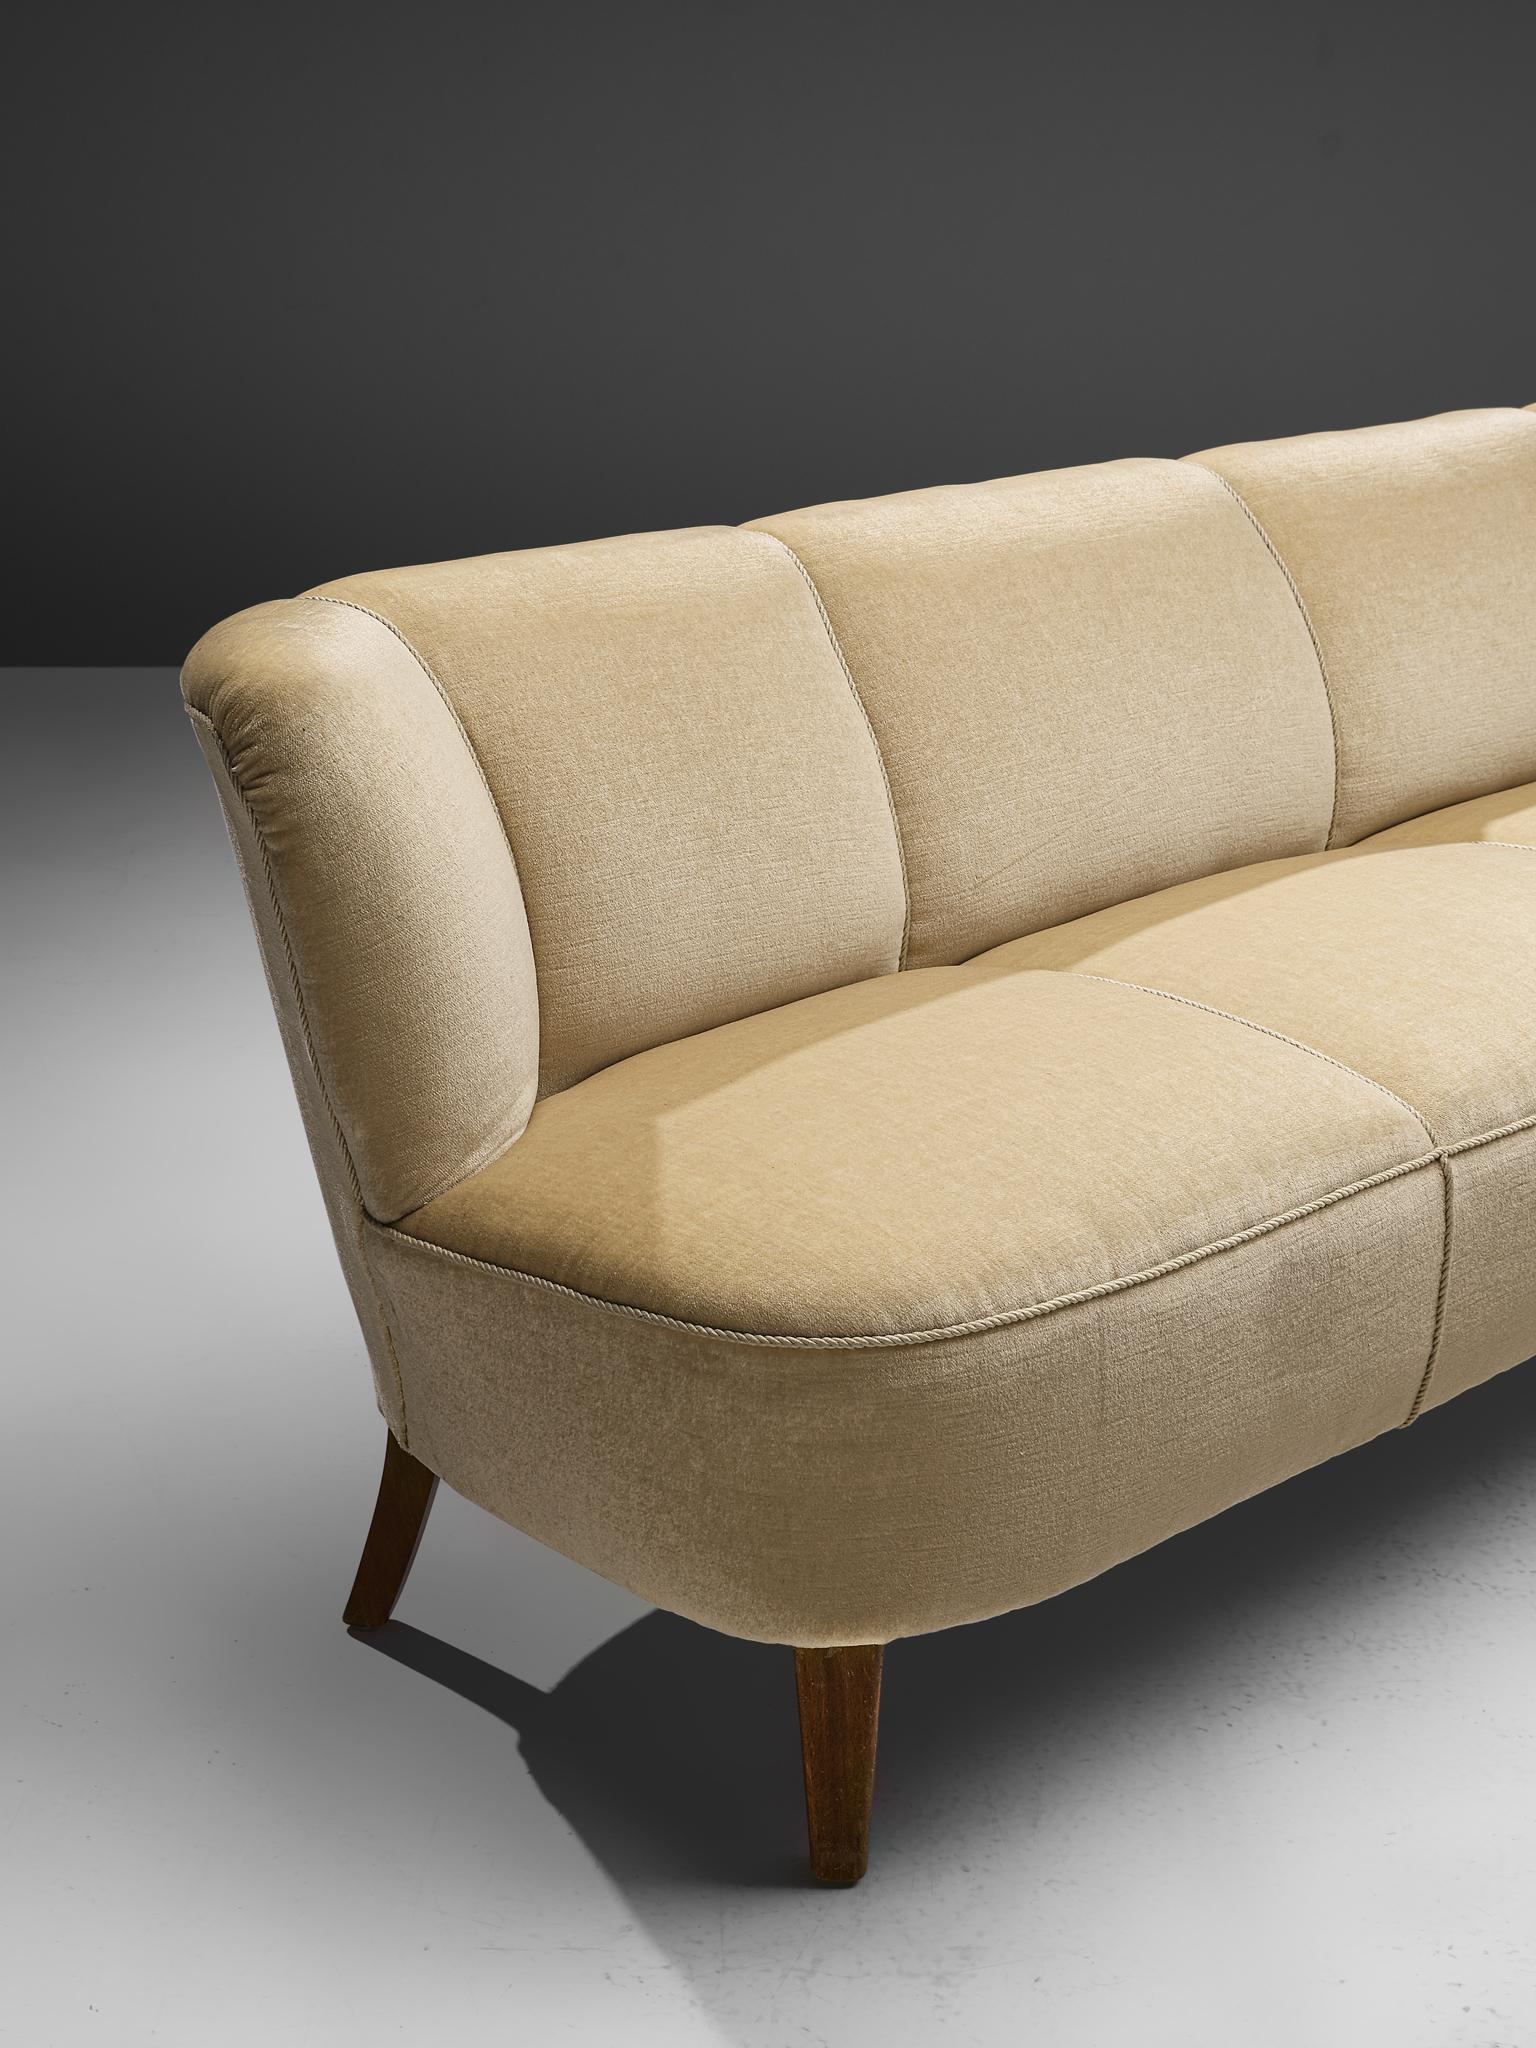 Late 20th Century Danish L-Shaped Sofa in Off-White Upholstery